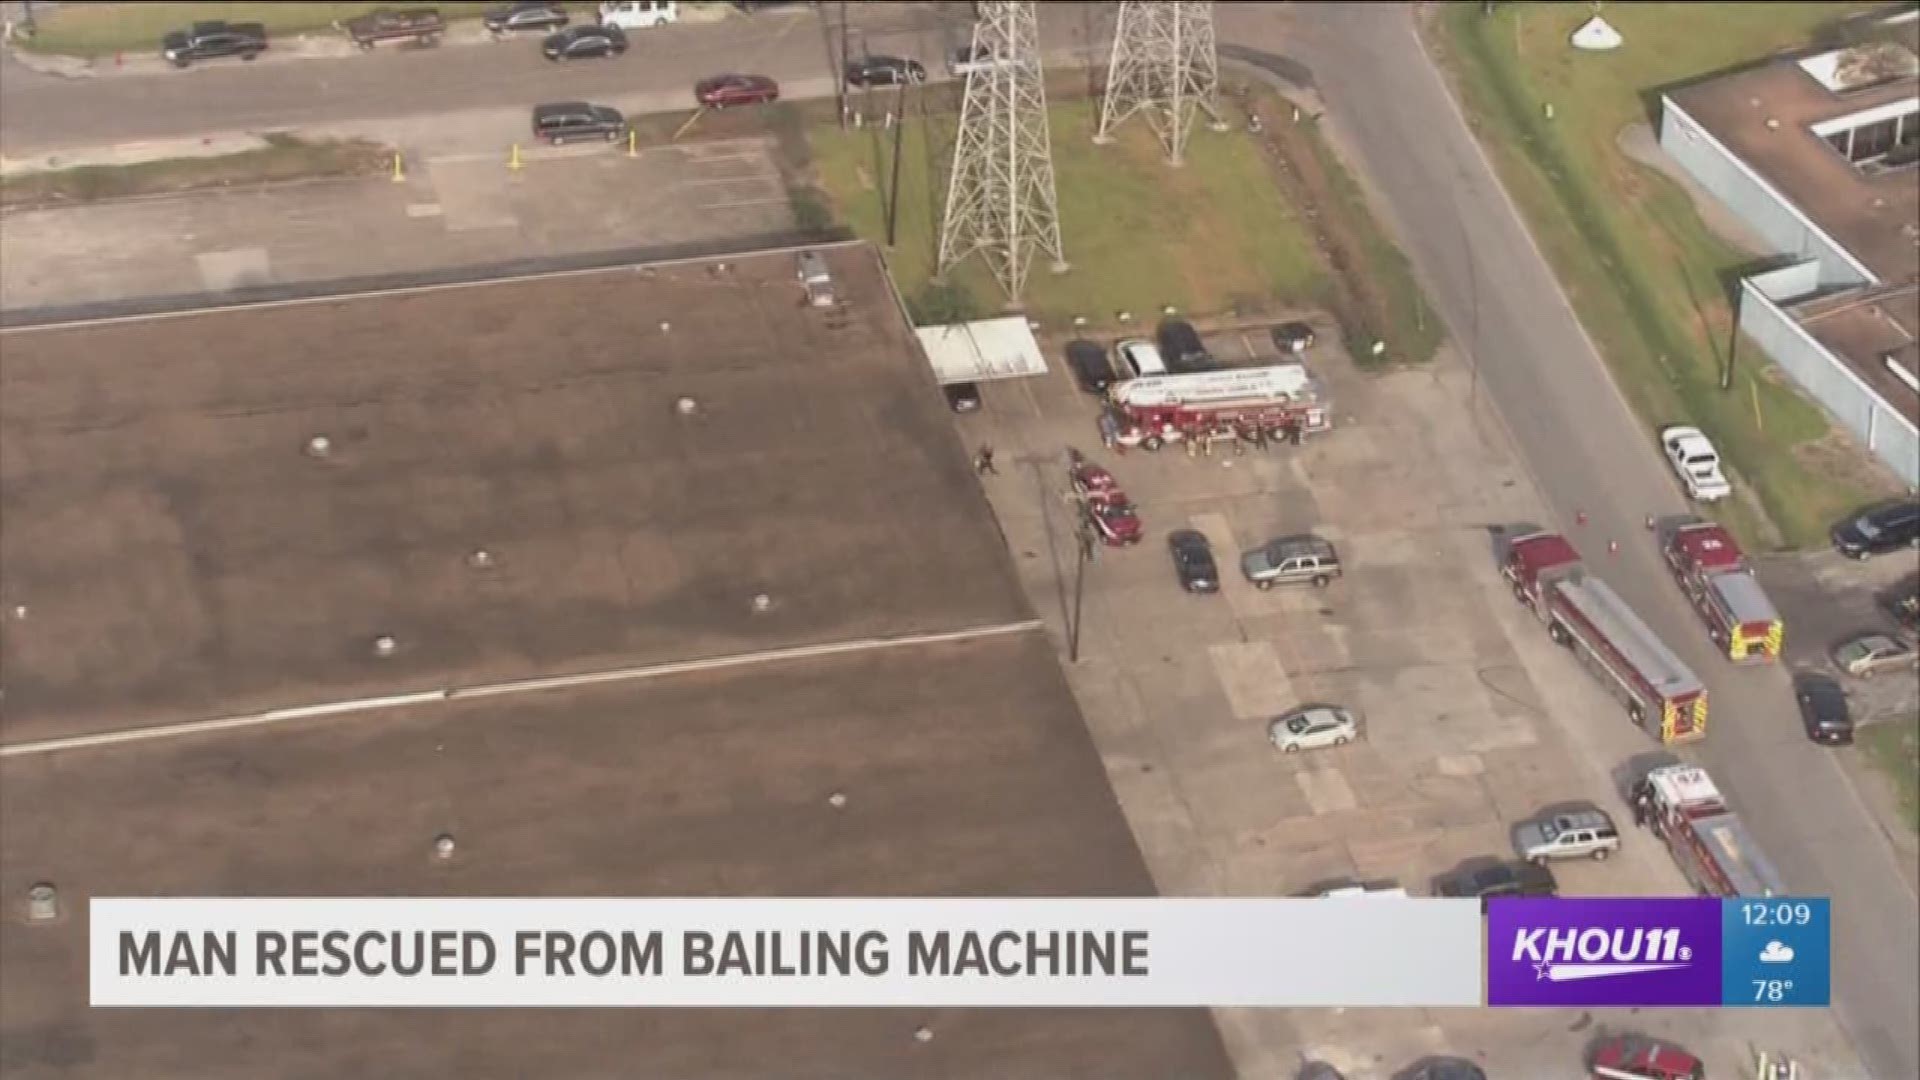 A man is in the hospital after being rescued from a bailing machine in southeast Houston.